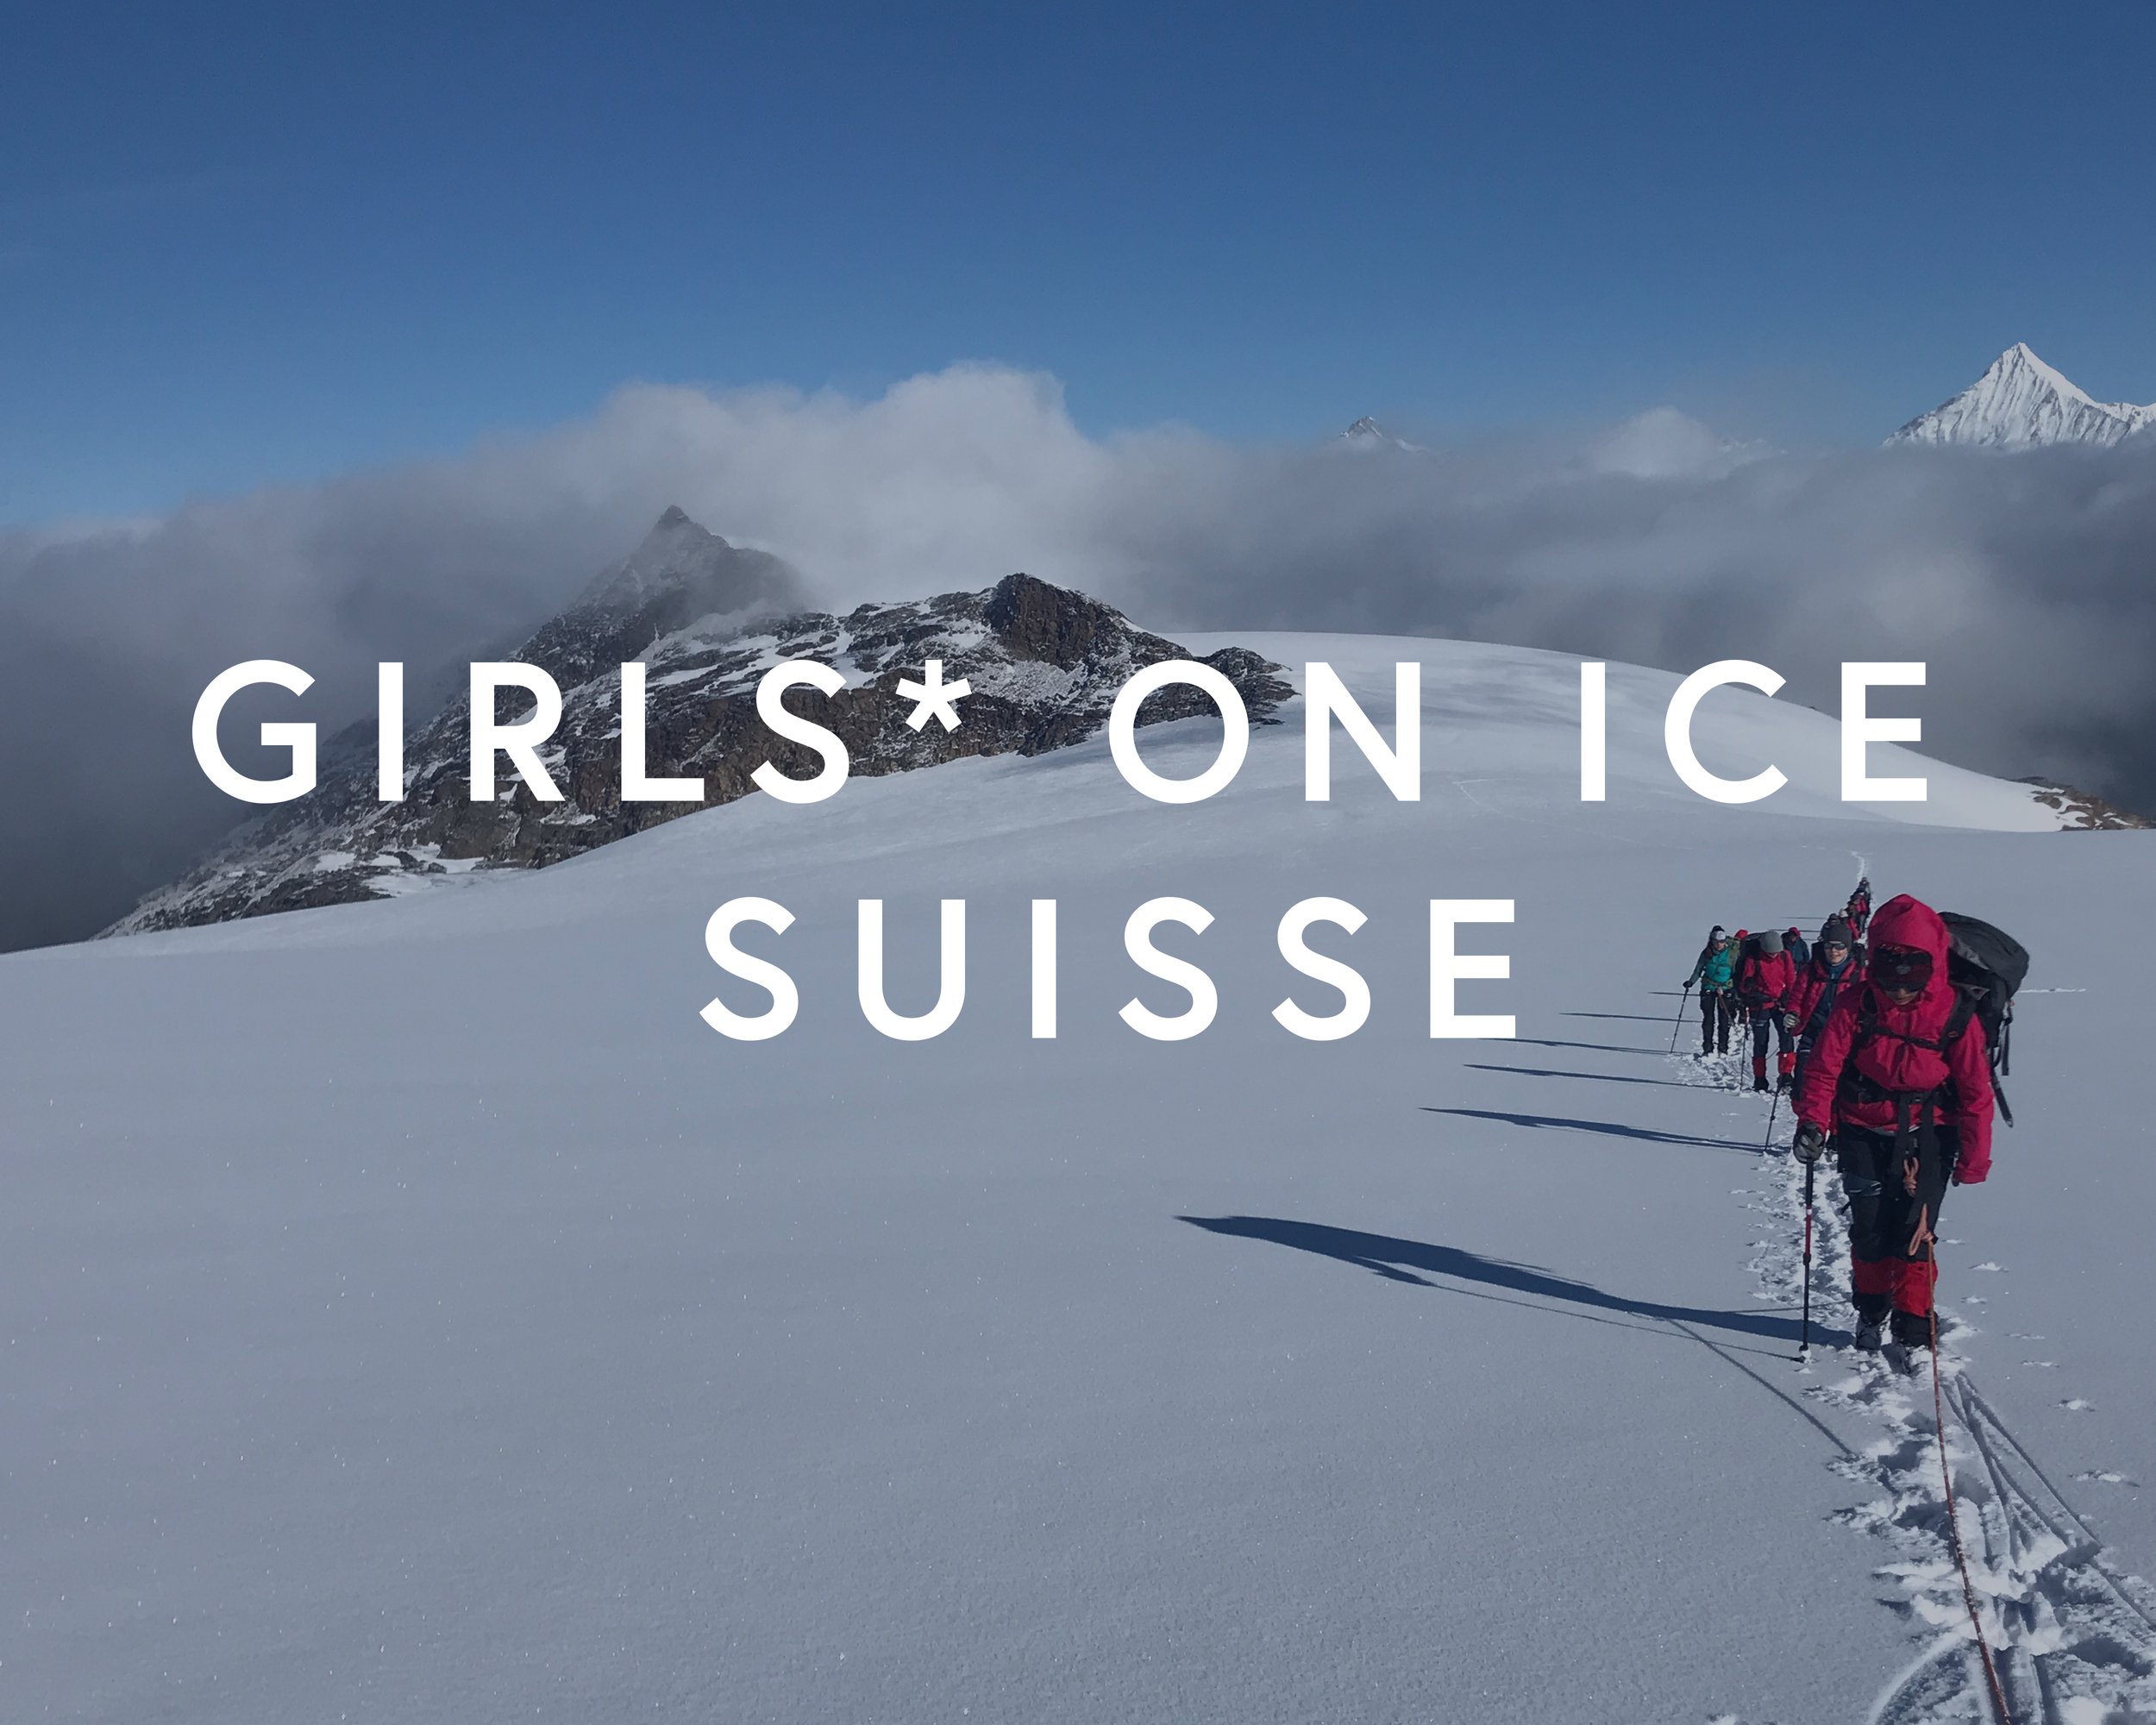 Image links to the Girls* on ice suisse expedition info page (Copy)